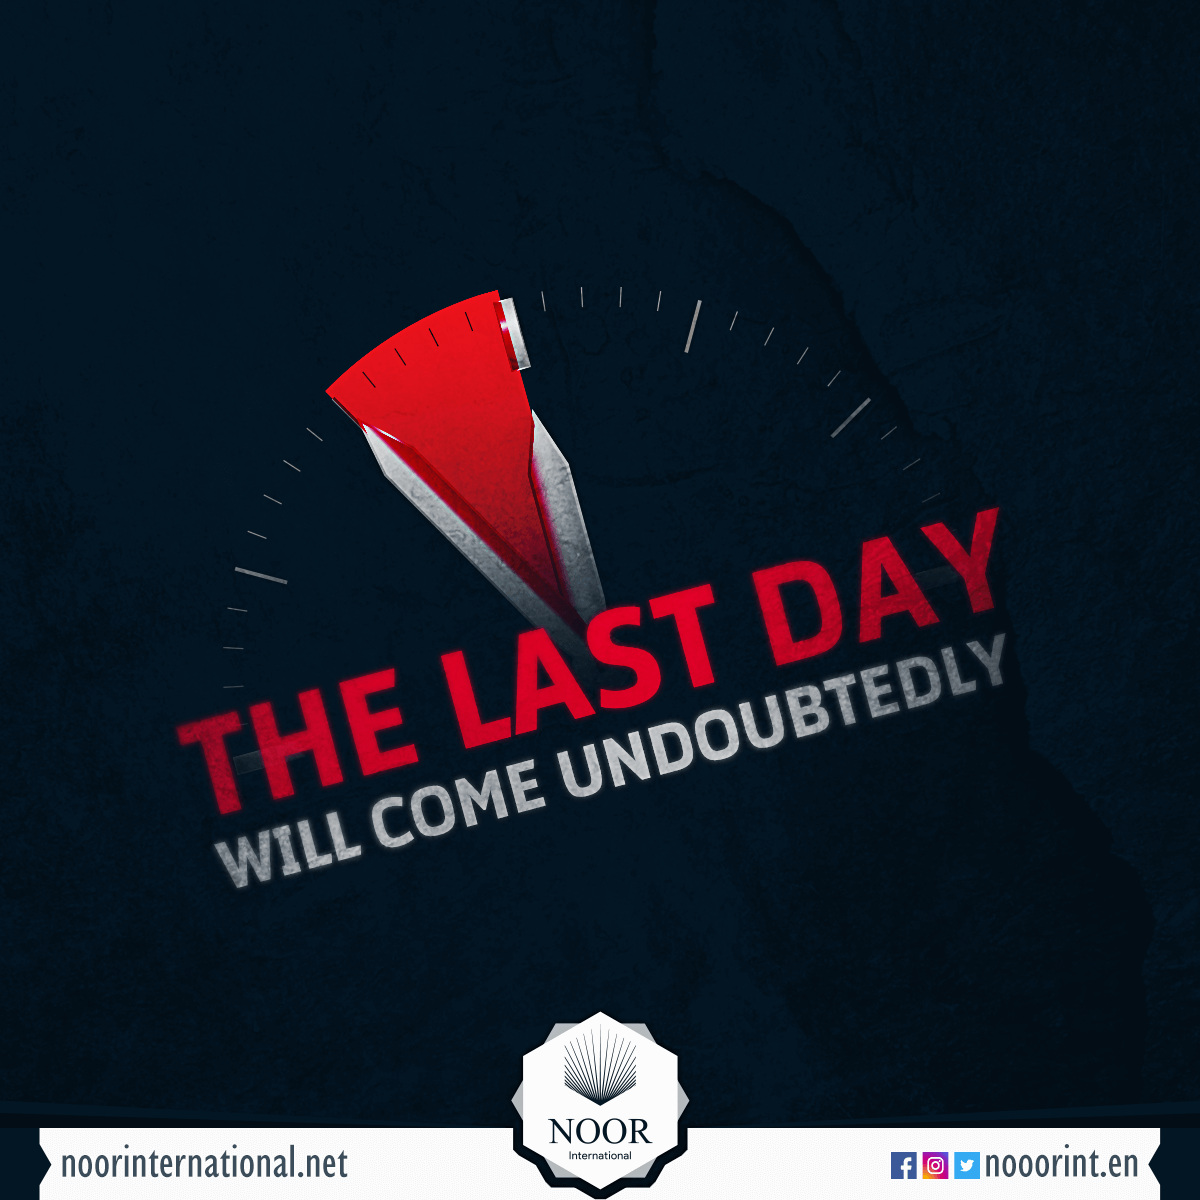 The last day will come undoubtedly